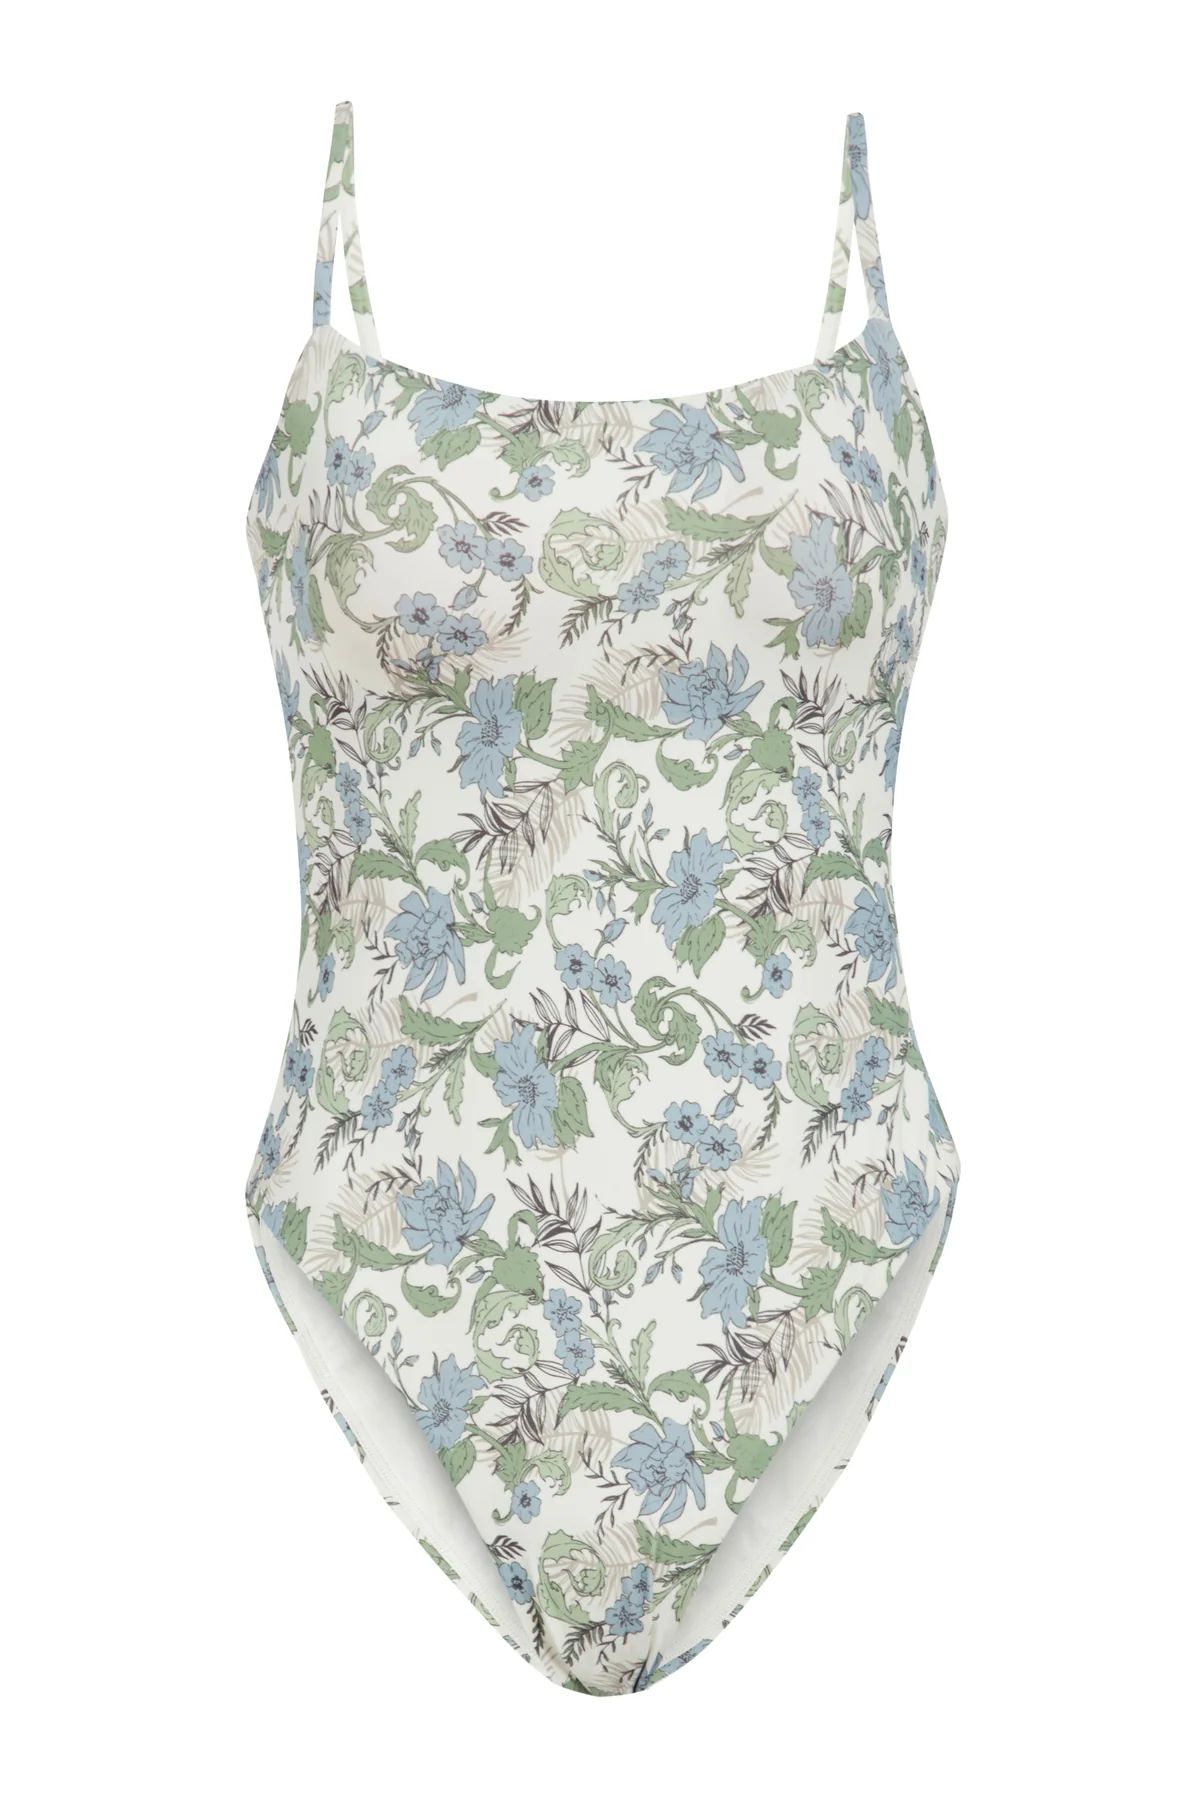 The Amalfi One Piece in Tuscan Floral | Over The Moon